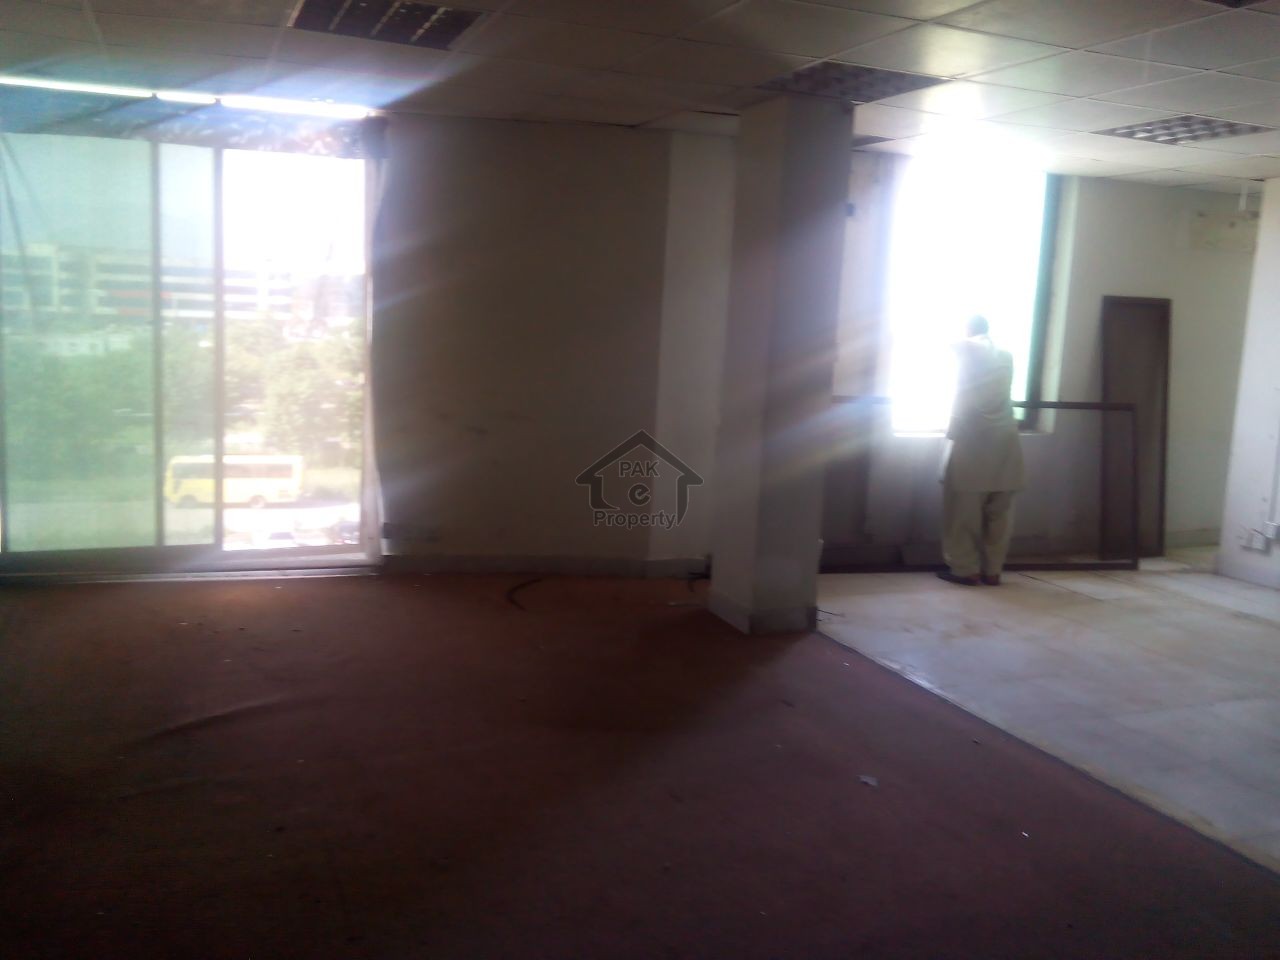 Third Floor Hall For Commercial Use Available For Rent In I-8 Markaz Prime Location